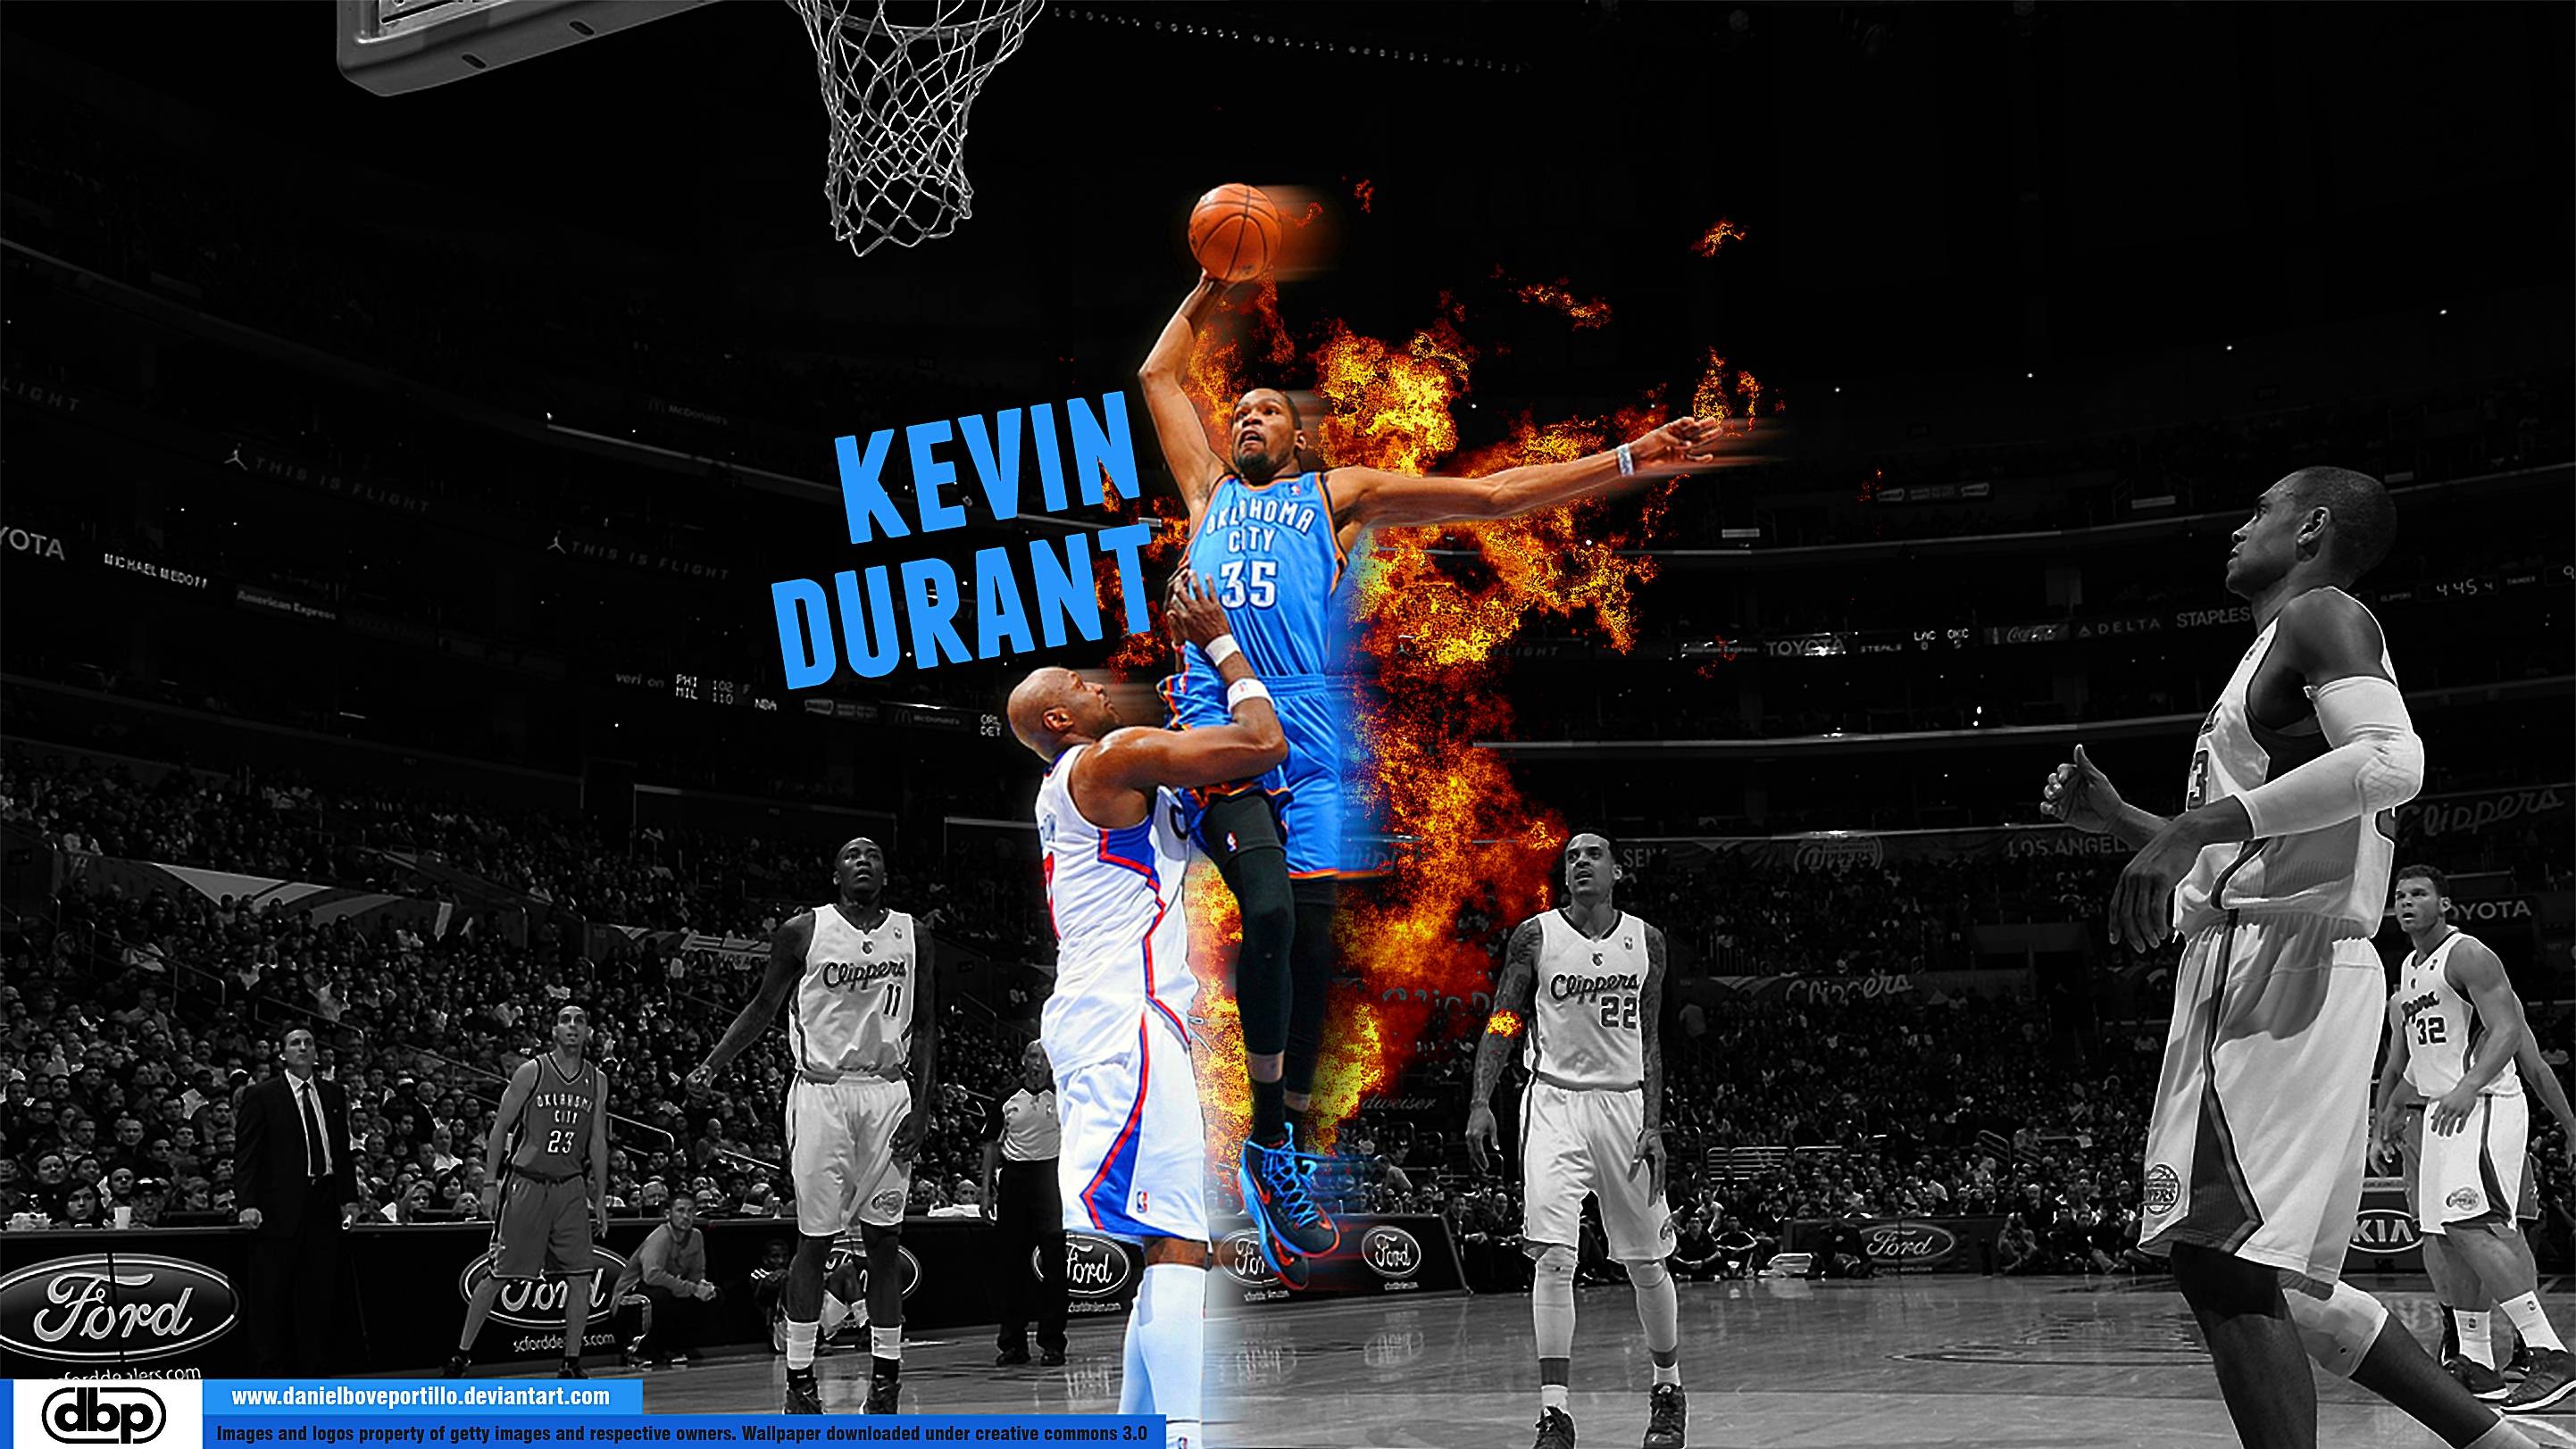 kd dunking on someone